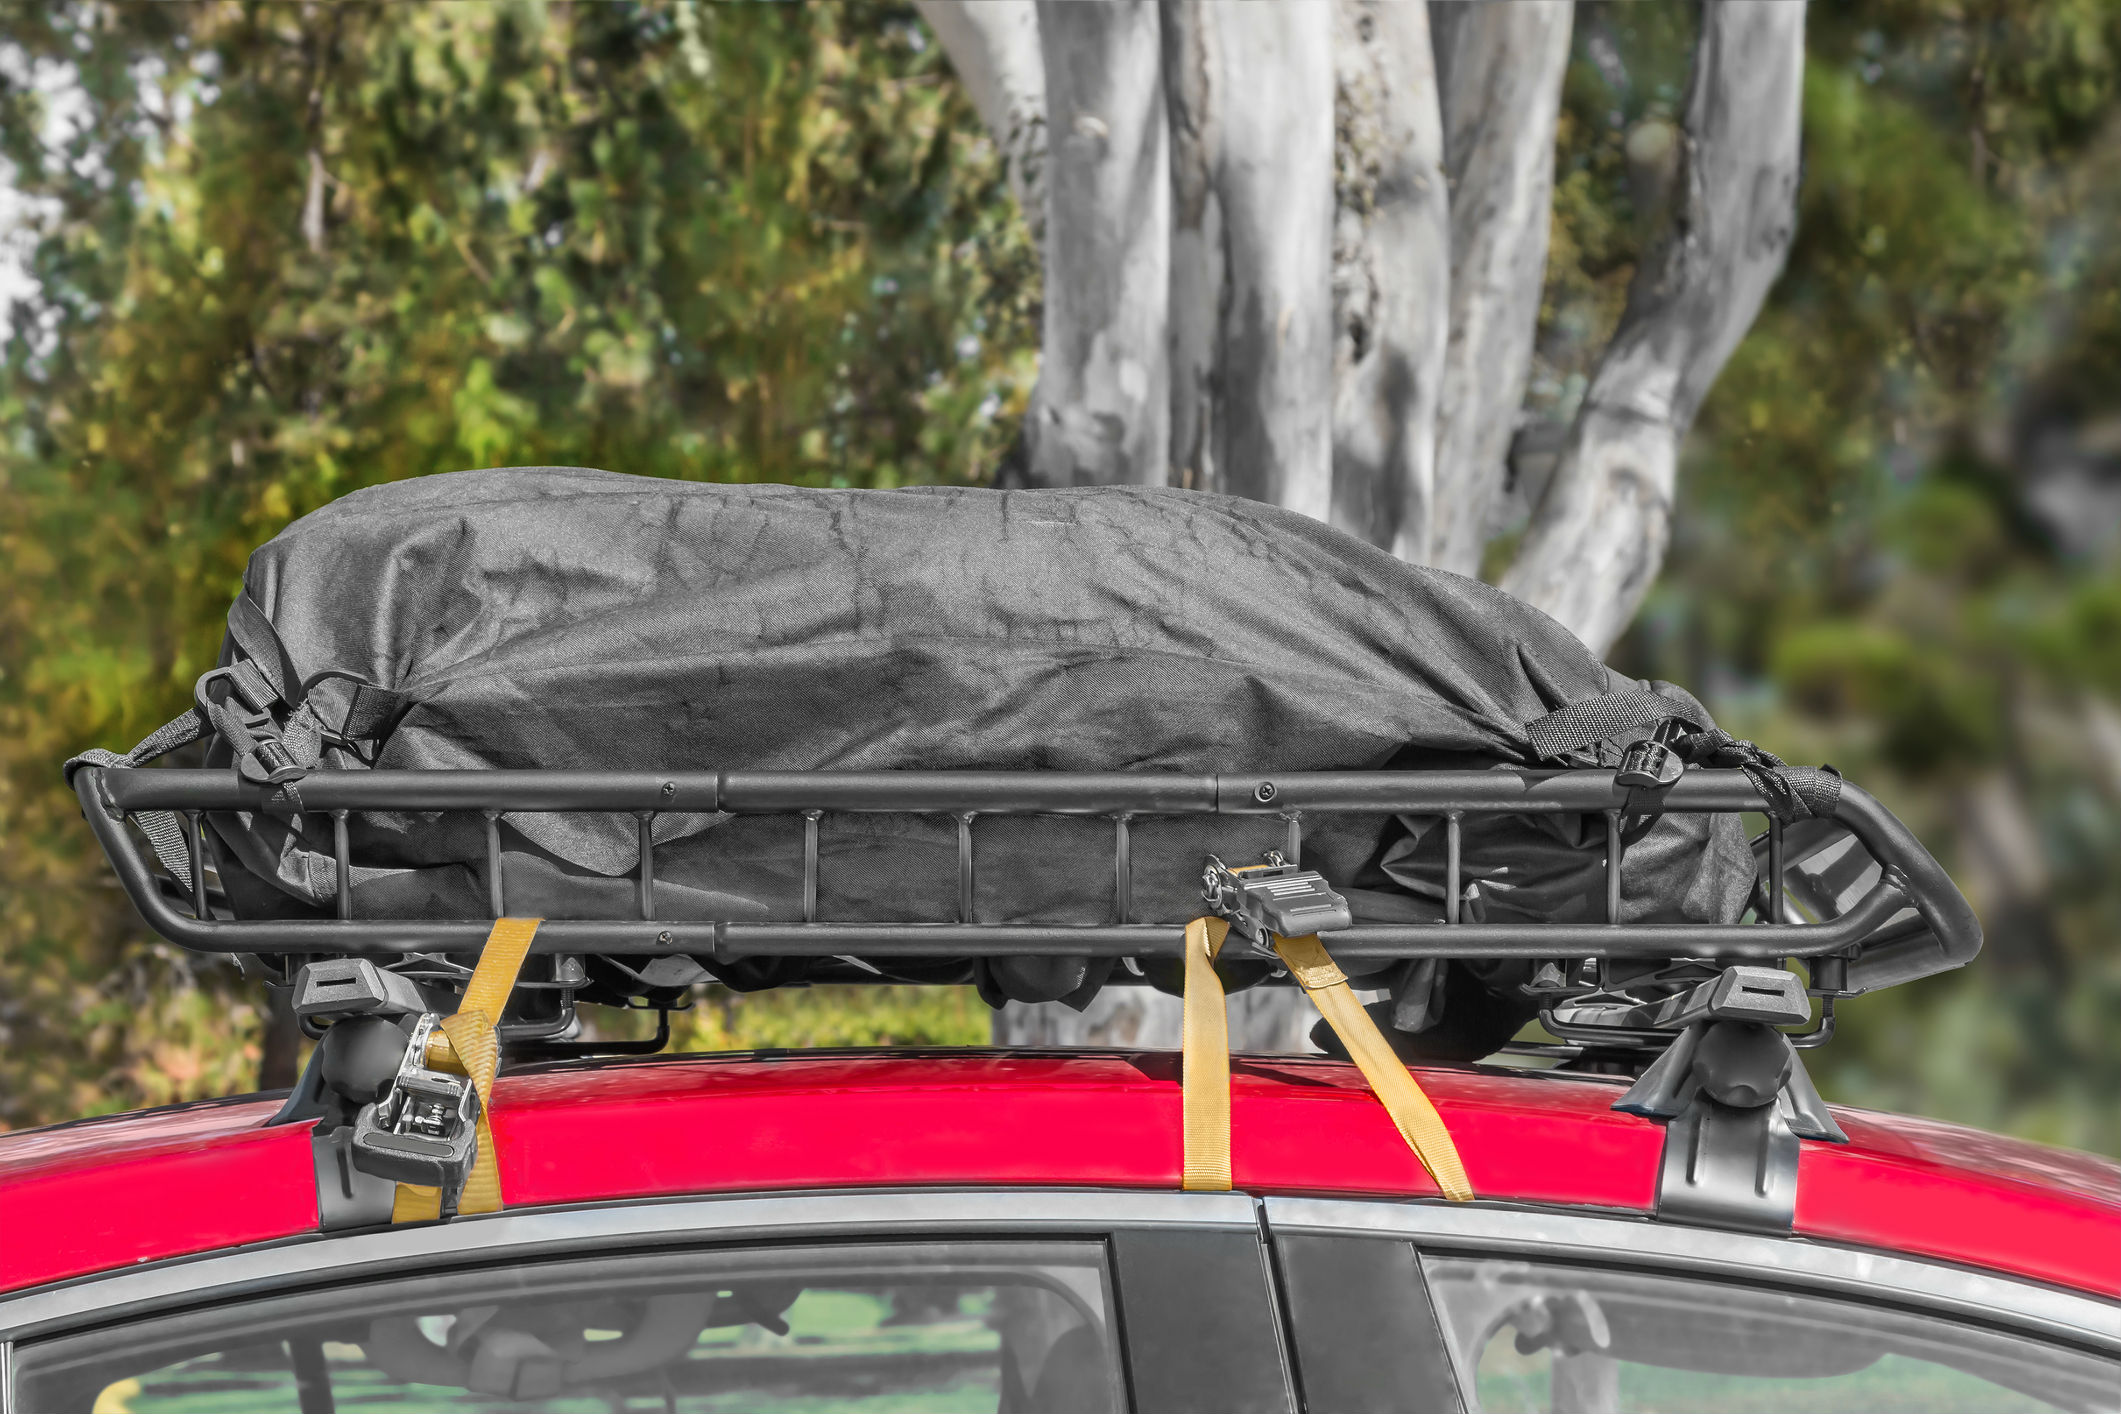 Balancing act: how to load a car roof rack safely